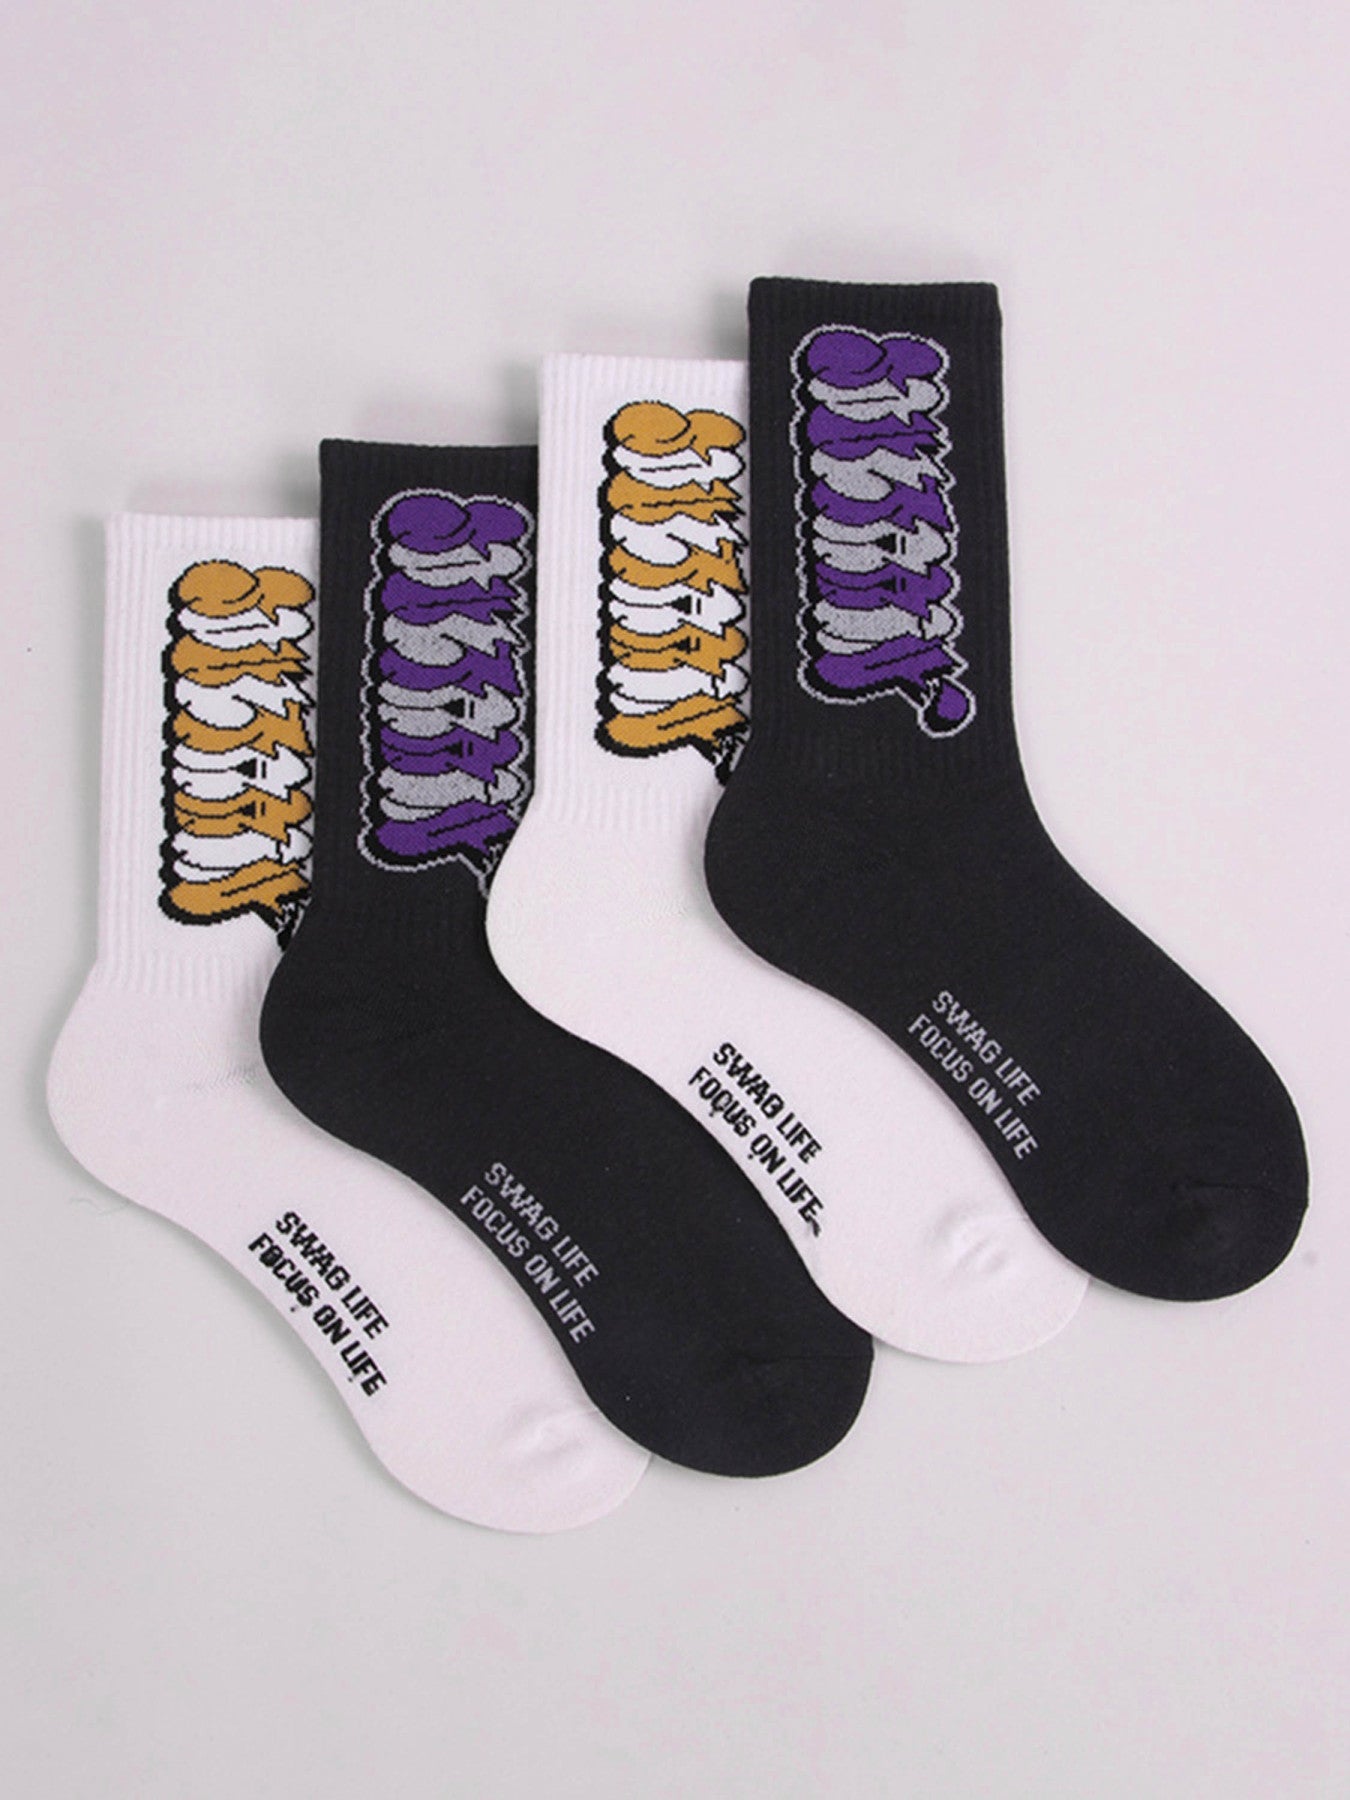 The Supermade Hip-hop Hand-painted Graffiti Letters Stockings